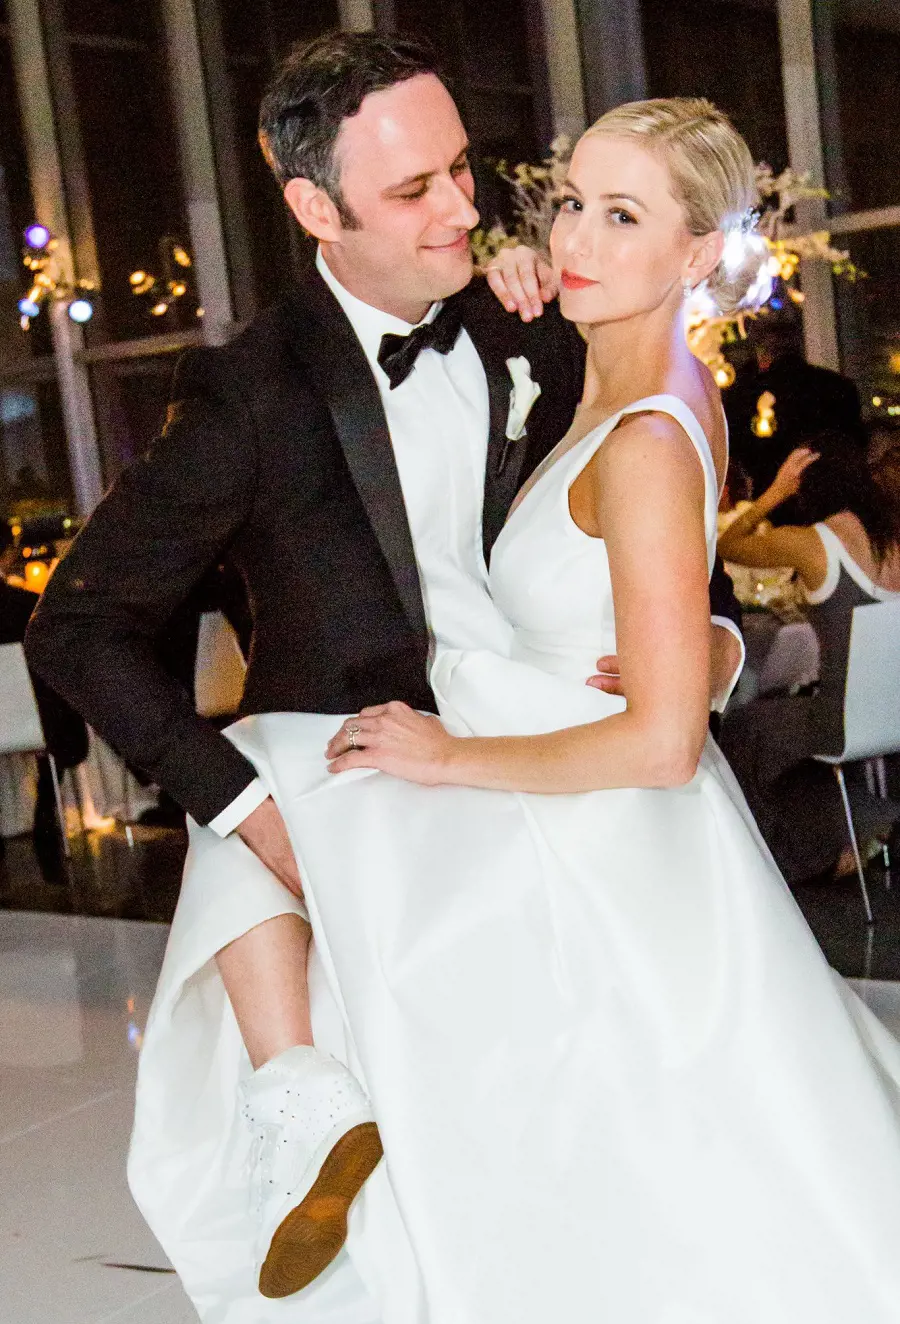  Iliza and her spouse looked stunningly gorgeous on their nuptial day held in 2018